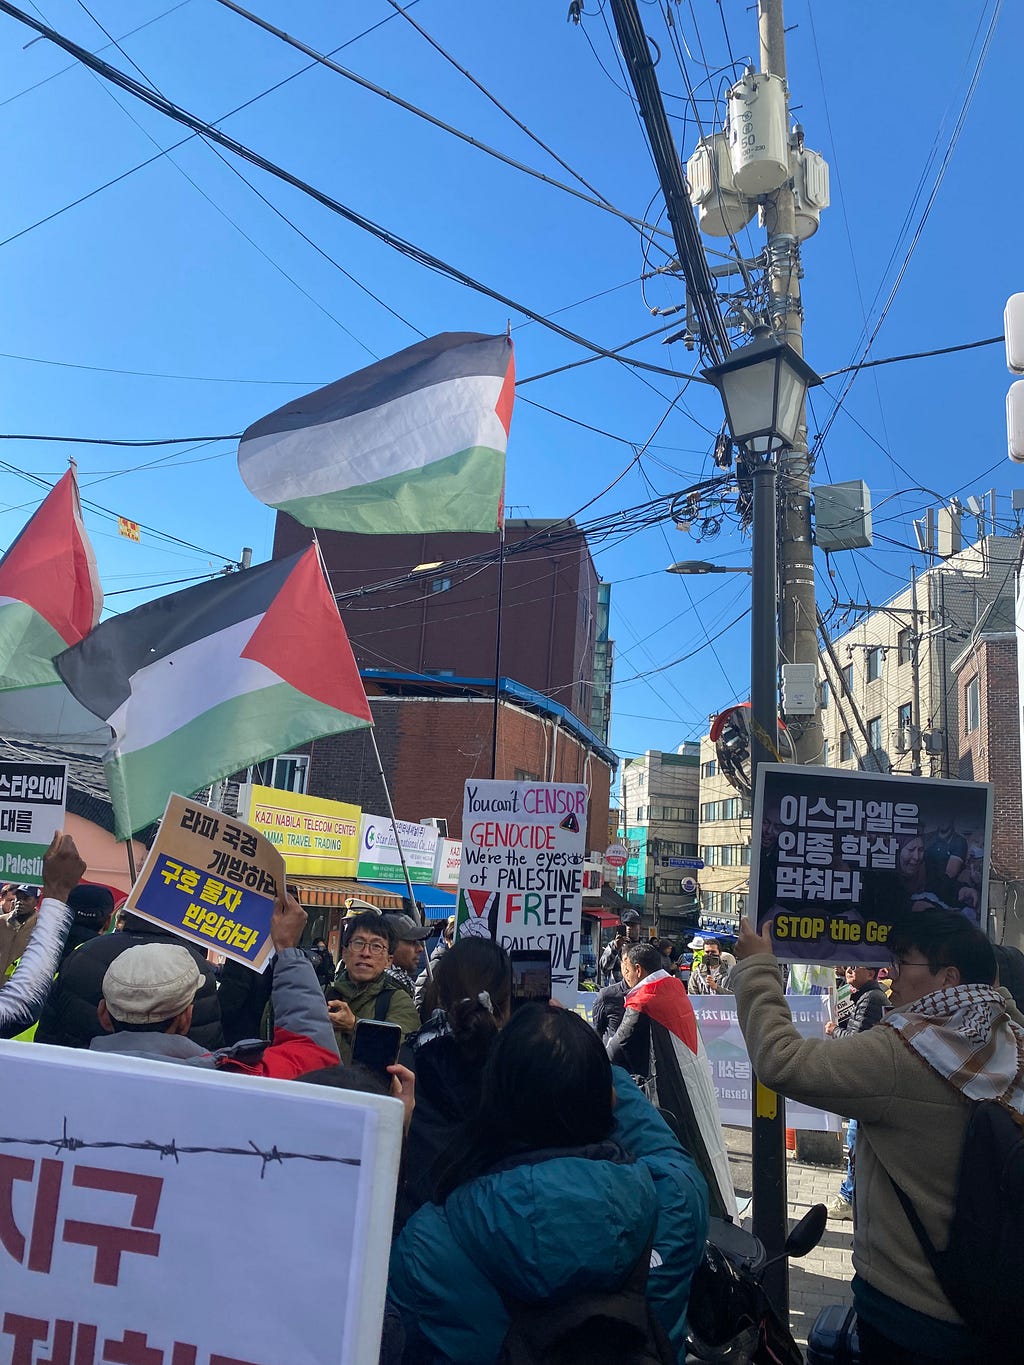 Author photo of a Palestine protest in Itaewon Seoul. Three Palestinian flags wave in the bright sunlight against a blue sky and there are posters in Korean and English.